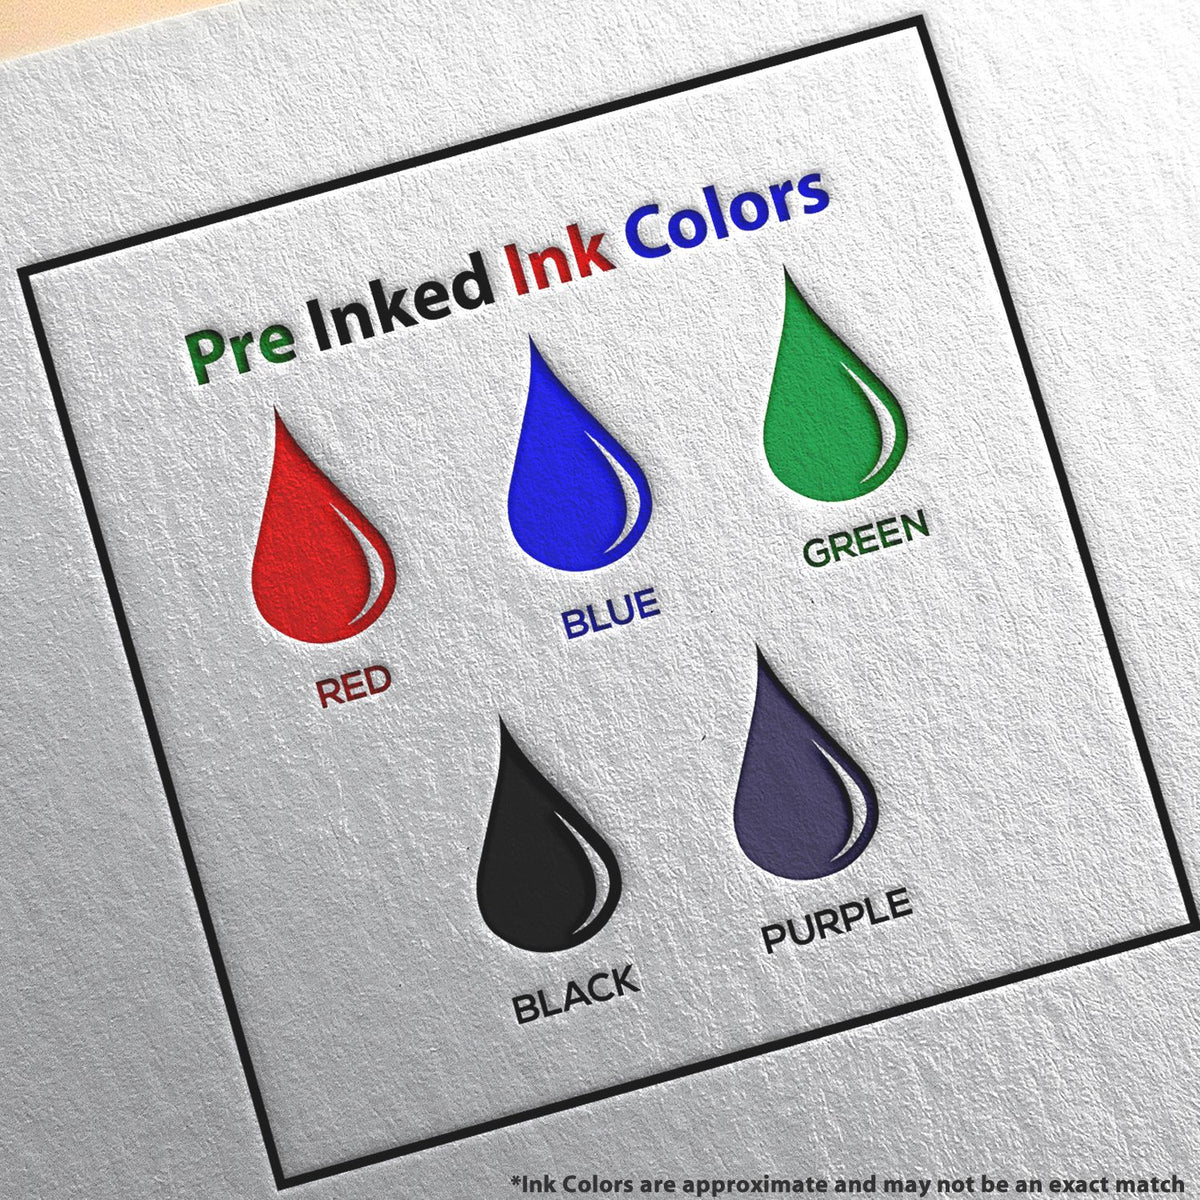 A picture showing the different ink colors or hues available for the Premium MaxLight Pre-Inked Alaska Geology Stamp